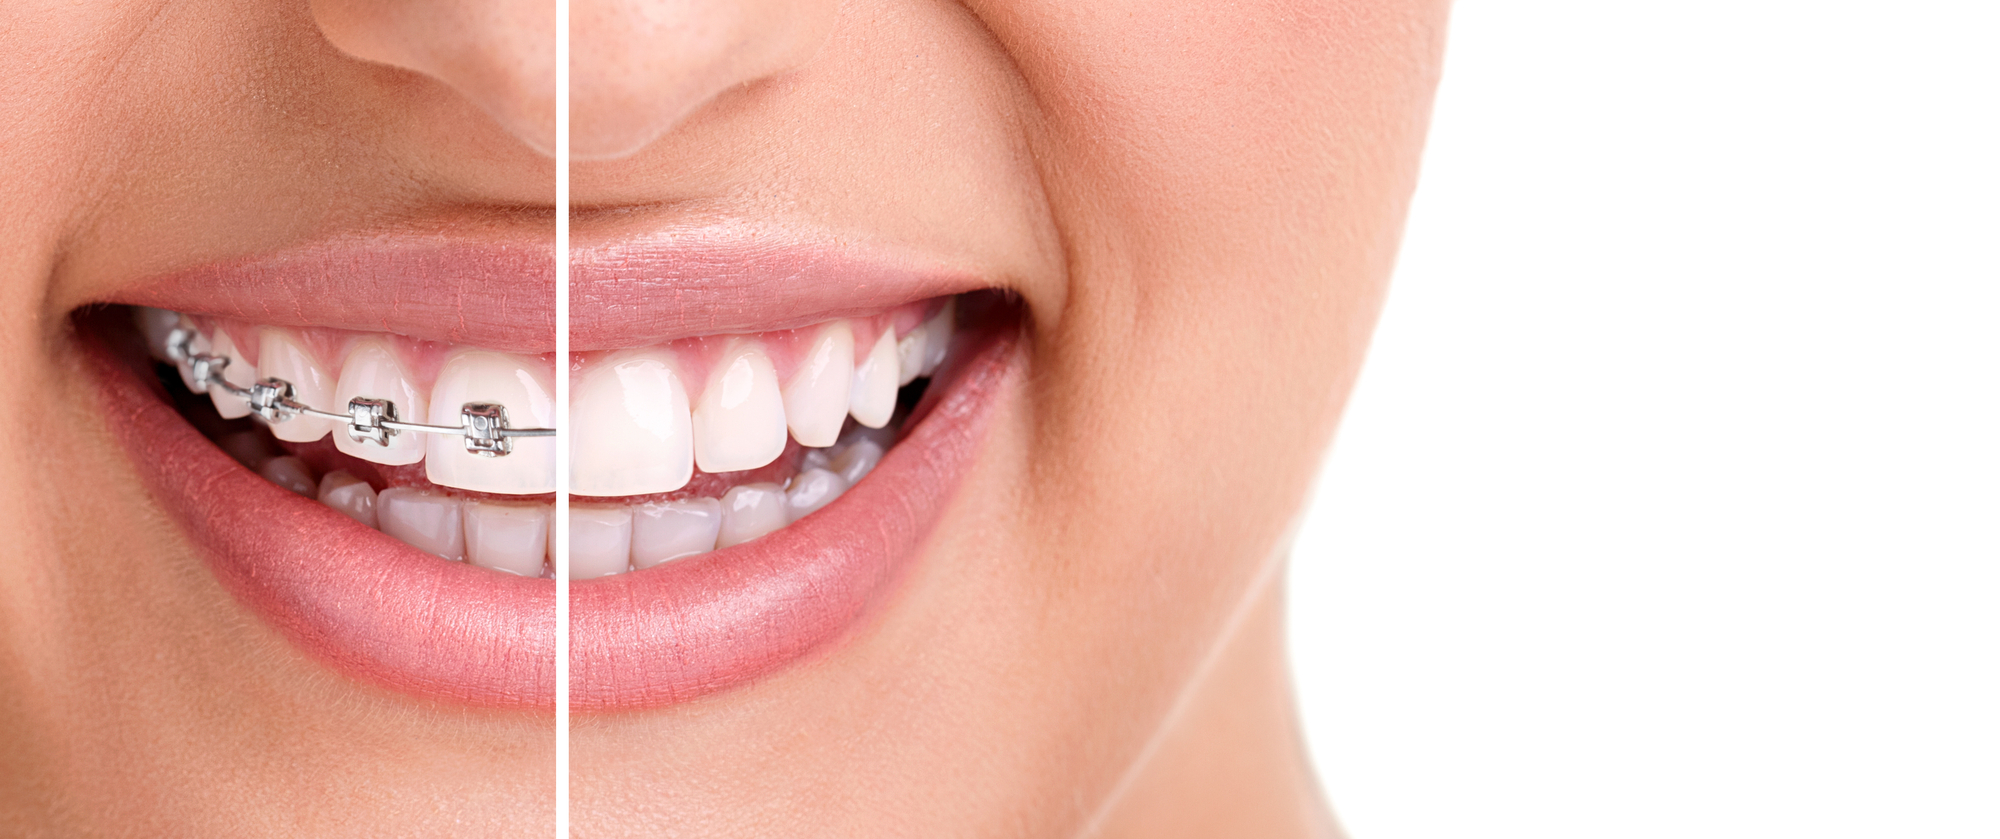 Clear-aligner vs Braces for Adults